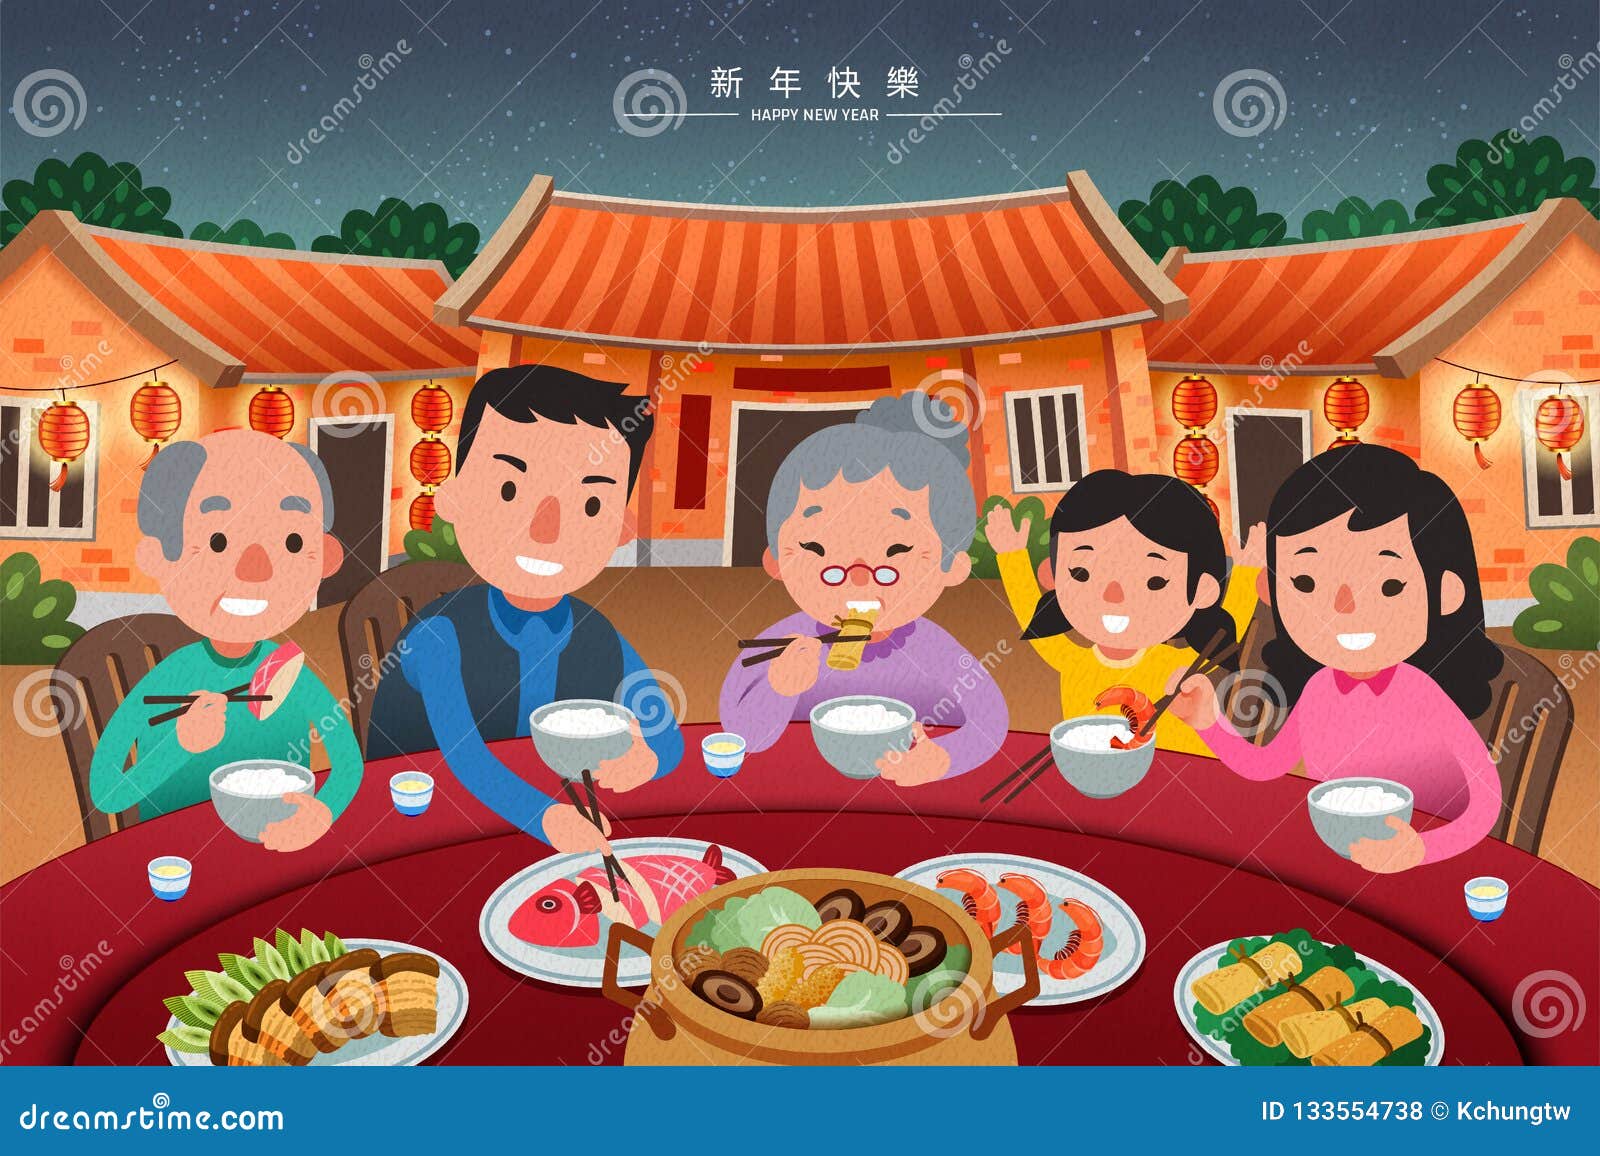 Traditional Reunion Dinner Family Lovely Flat Style Happy New Year Words Written Chinese Characters 133554738 